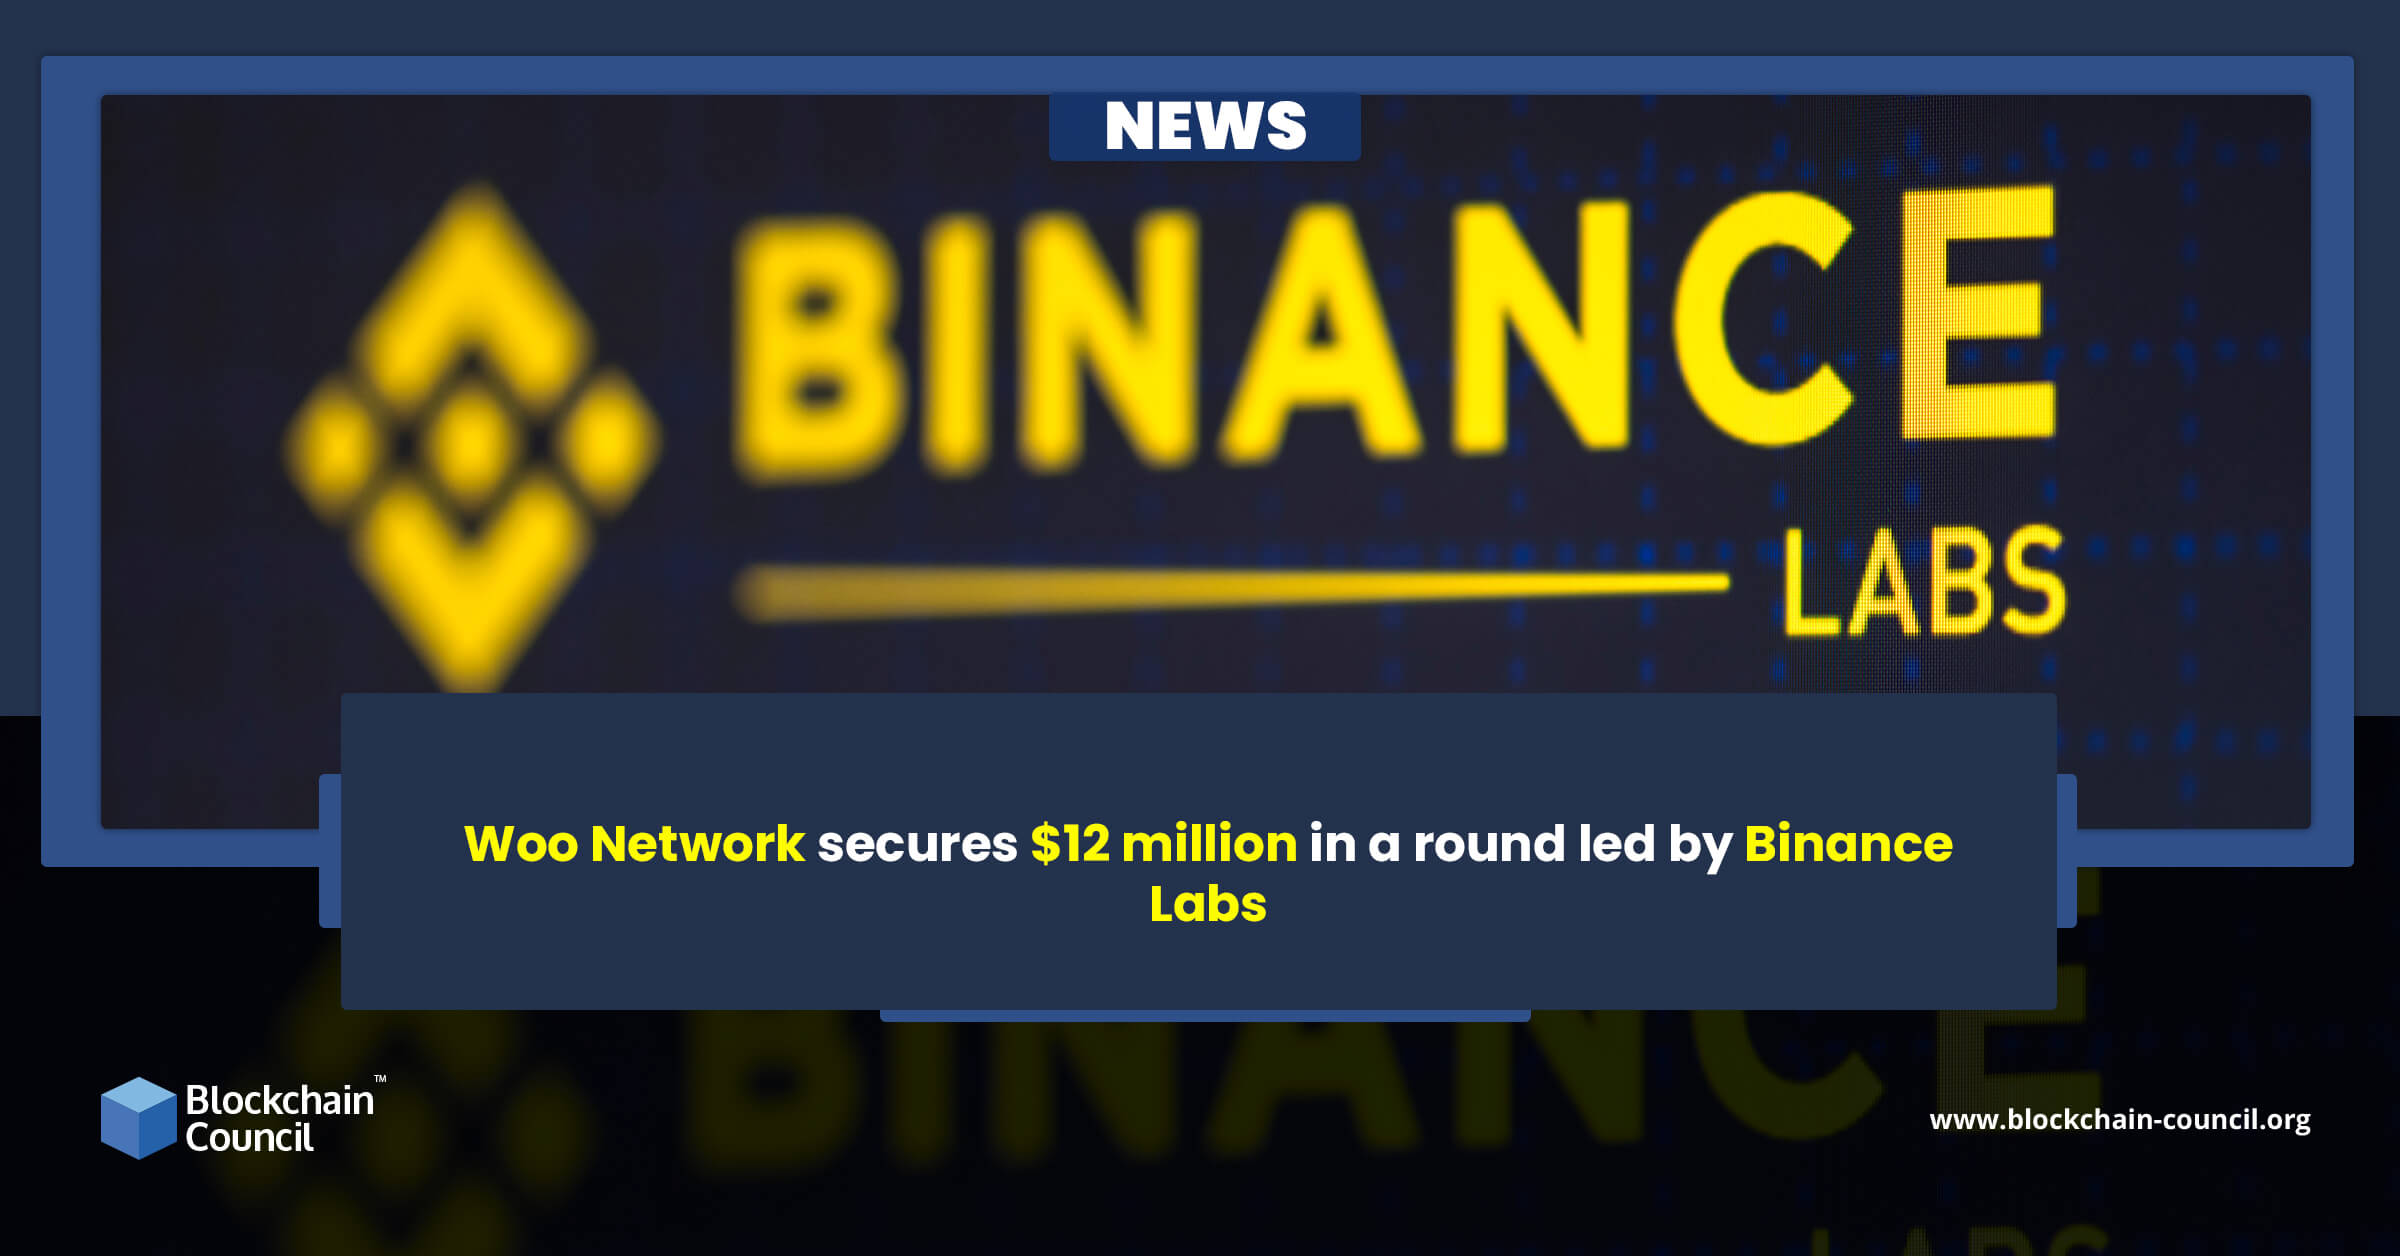 Woo Network secures $12 million in a round led by Binance Labs